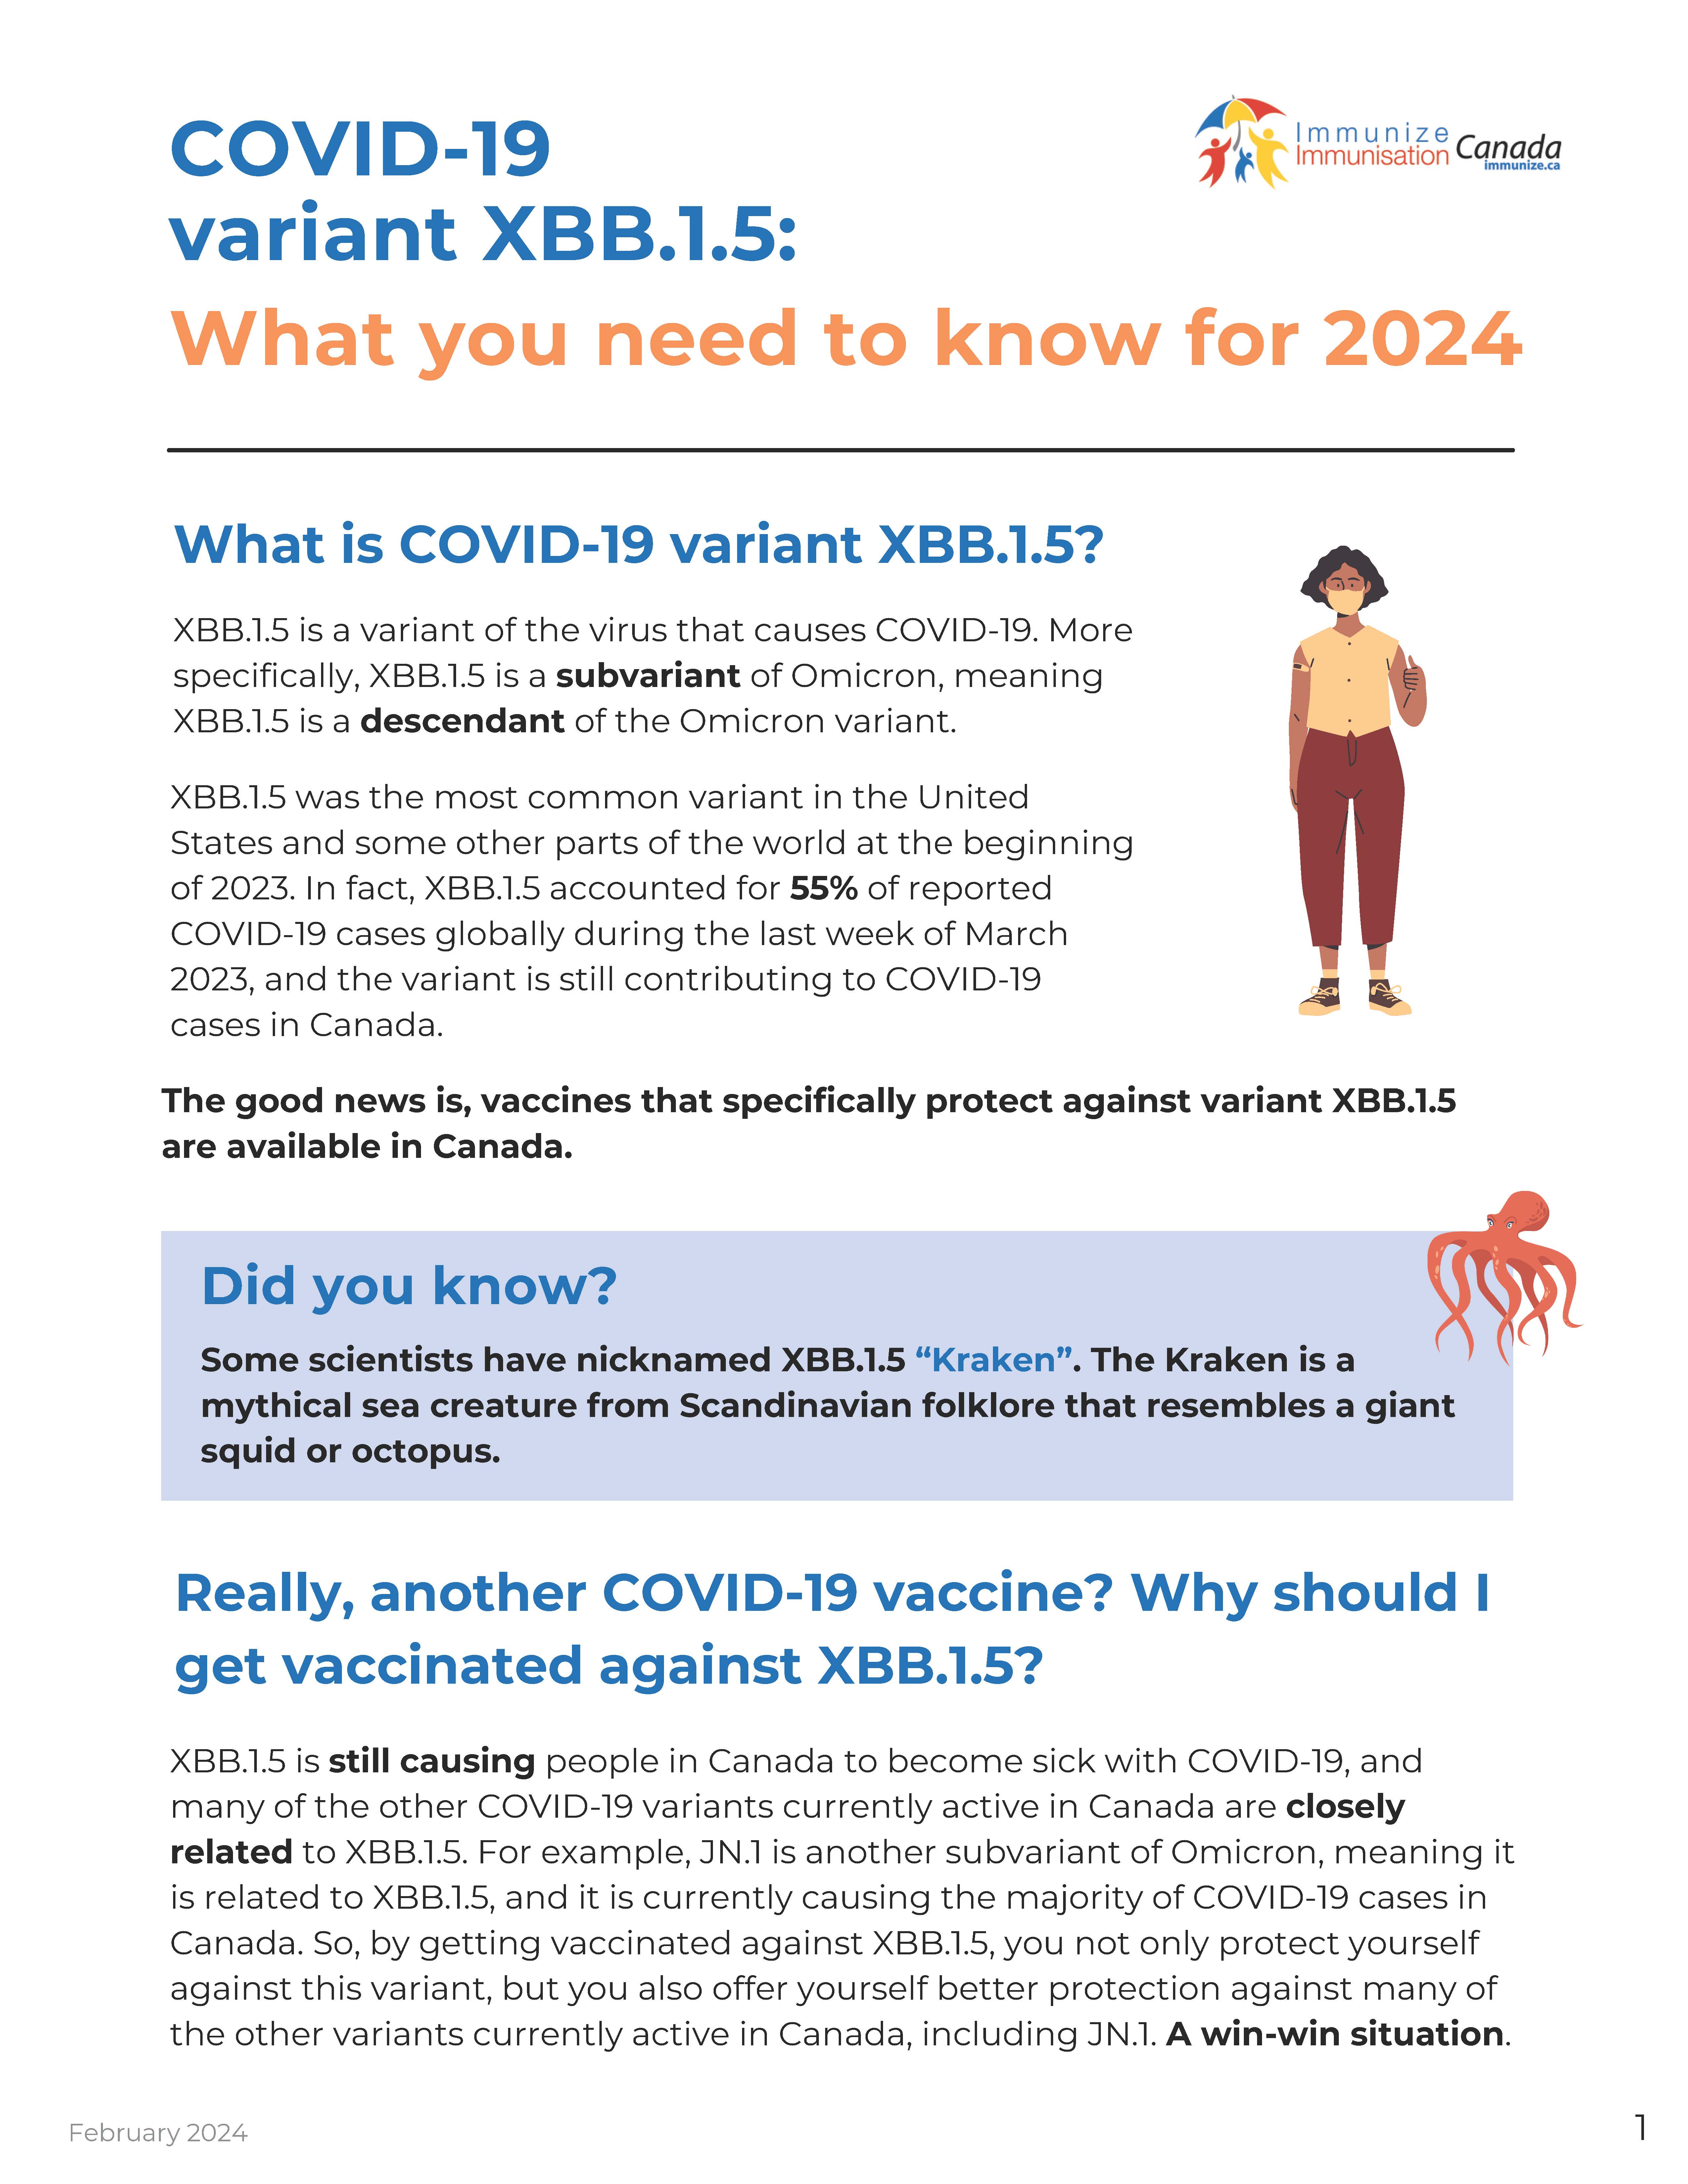 COVID-19 variant XBB.1.5: What you need to know for 2024